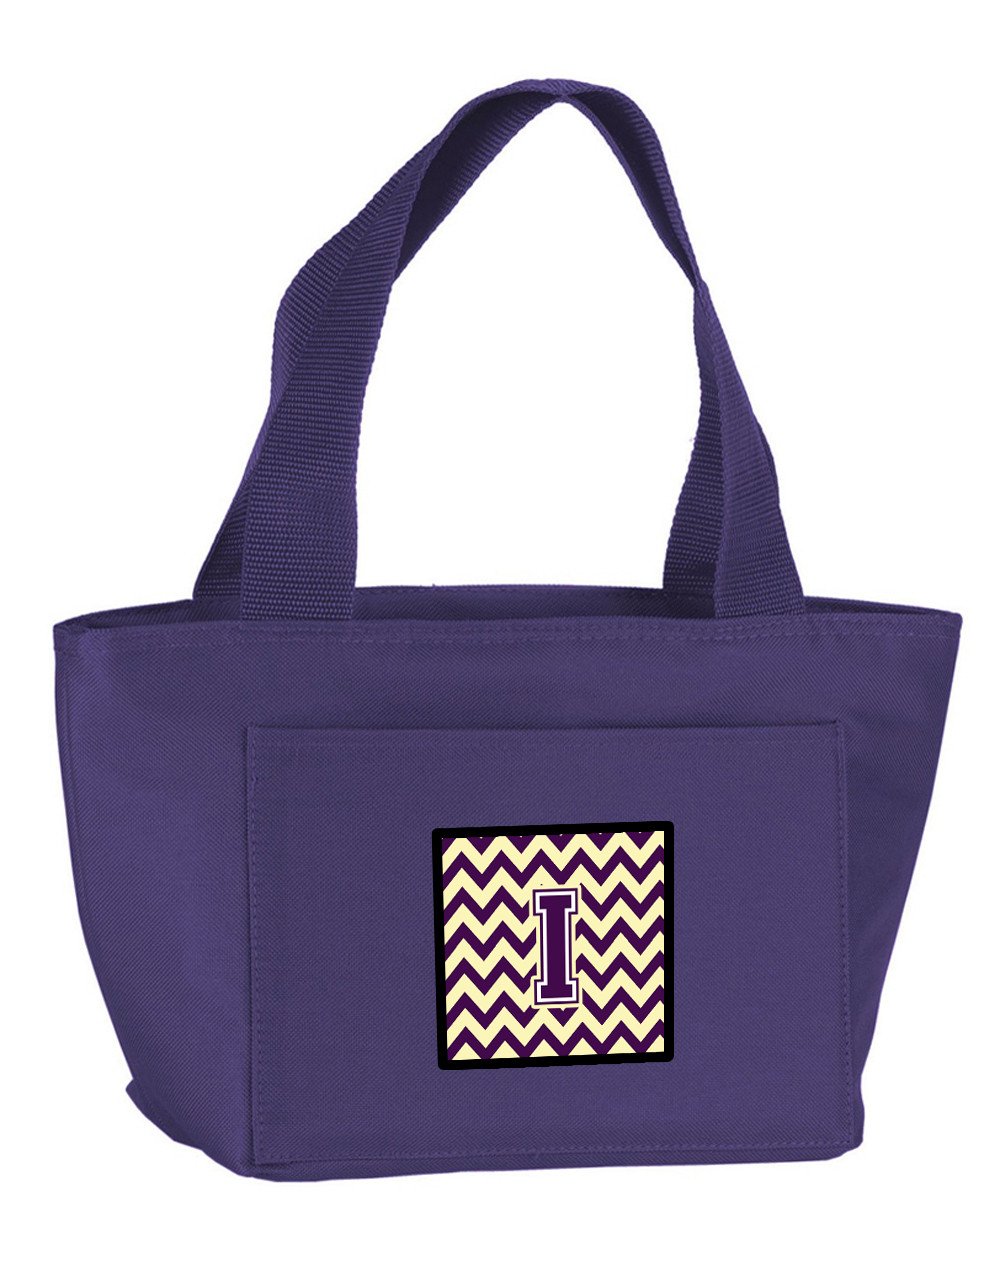 Letter I Chevron Purple and Gold Lunch Bag CJ1058-IPR-8808 by Caroline's Treasures